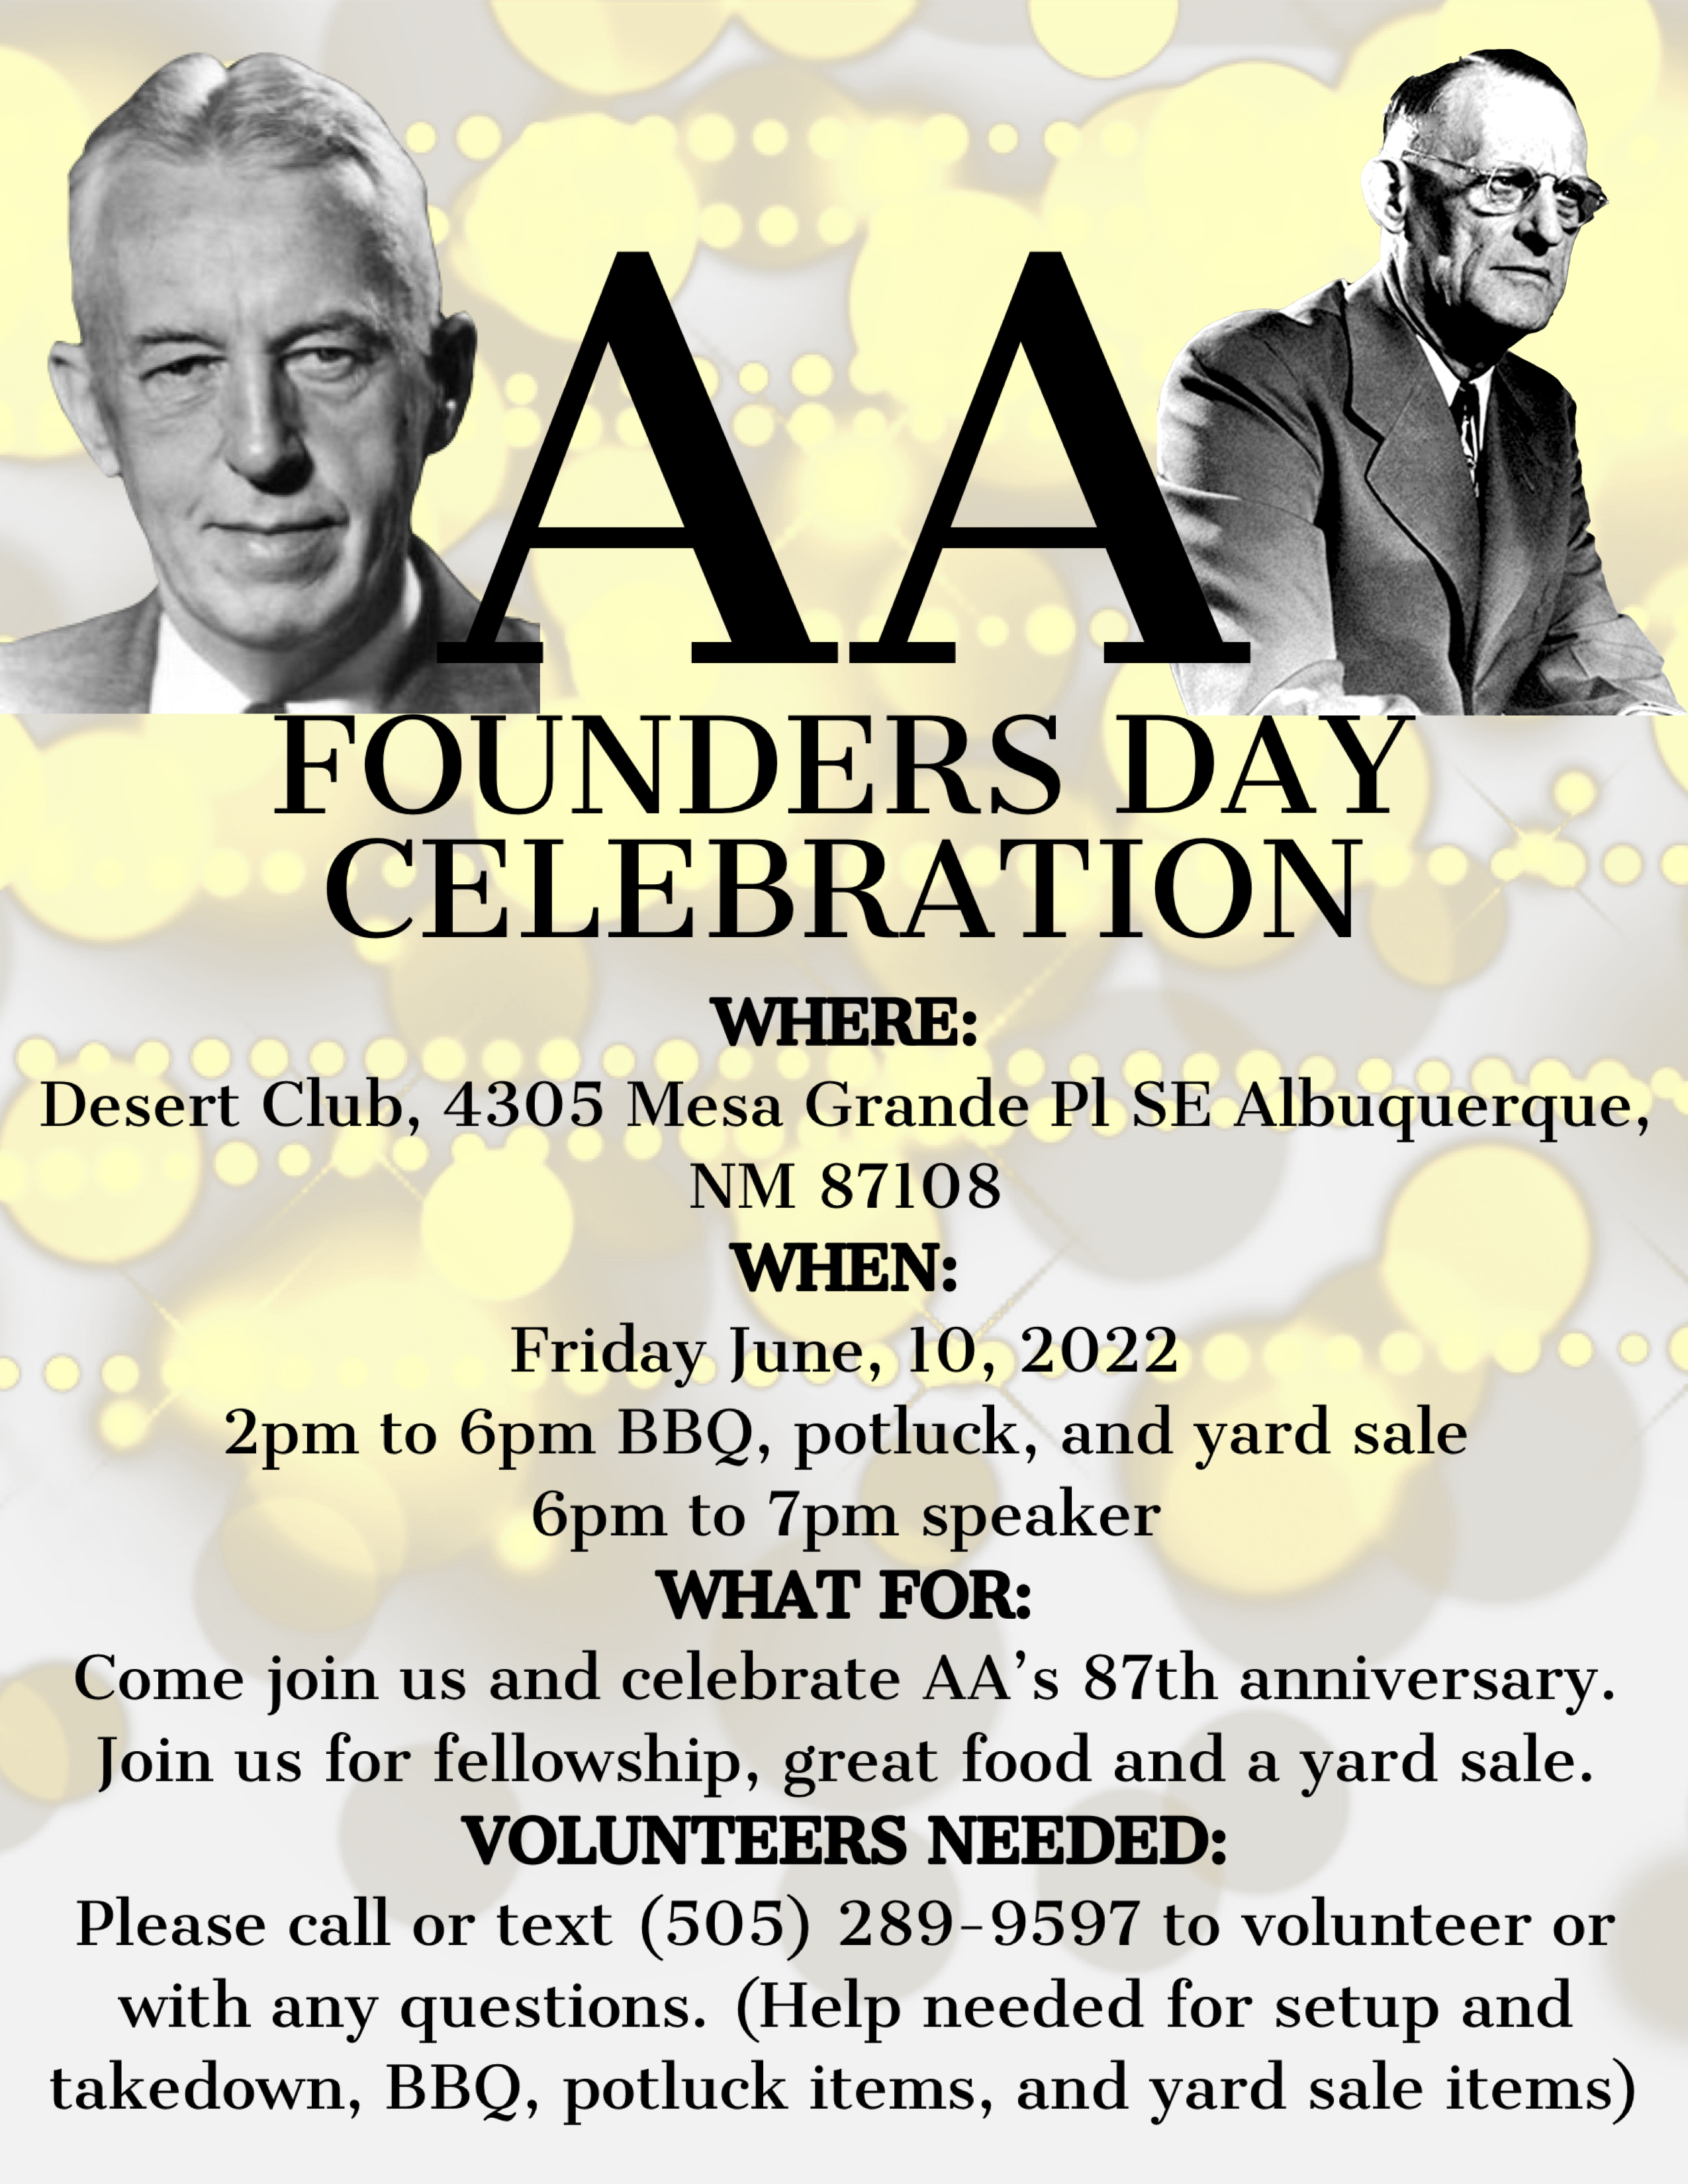 Founders day official flyer